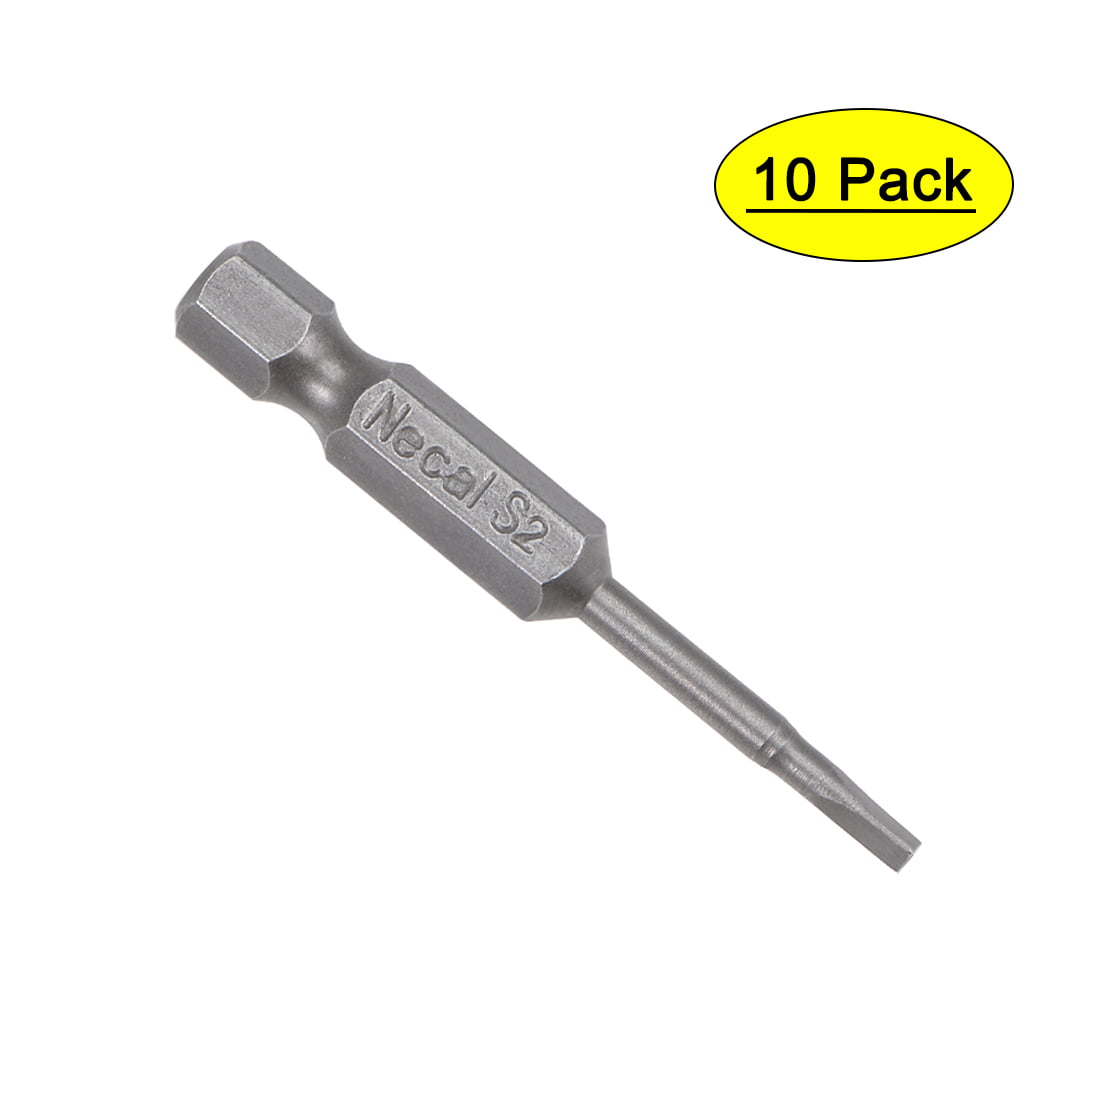 uxcell 10pcs 50mm 1/4 Hex Shank 2mm PH0 Magnetic Phillips Head Screwdriver Bits S2 High Alloy Steel 